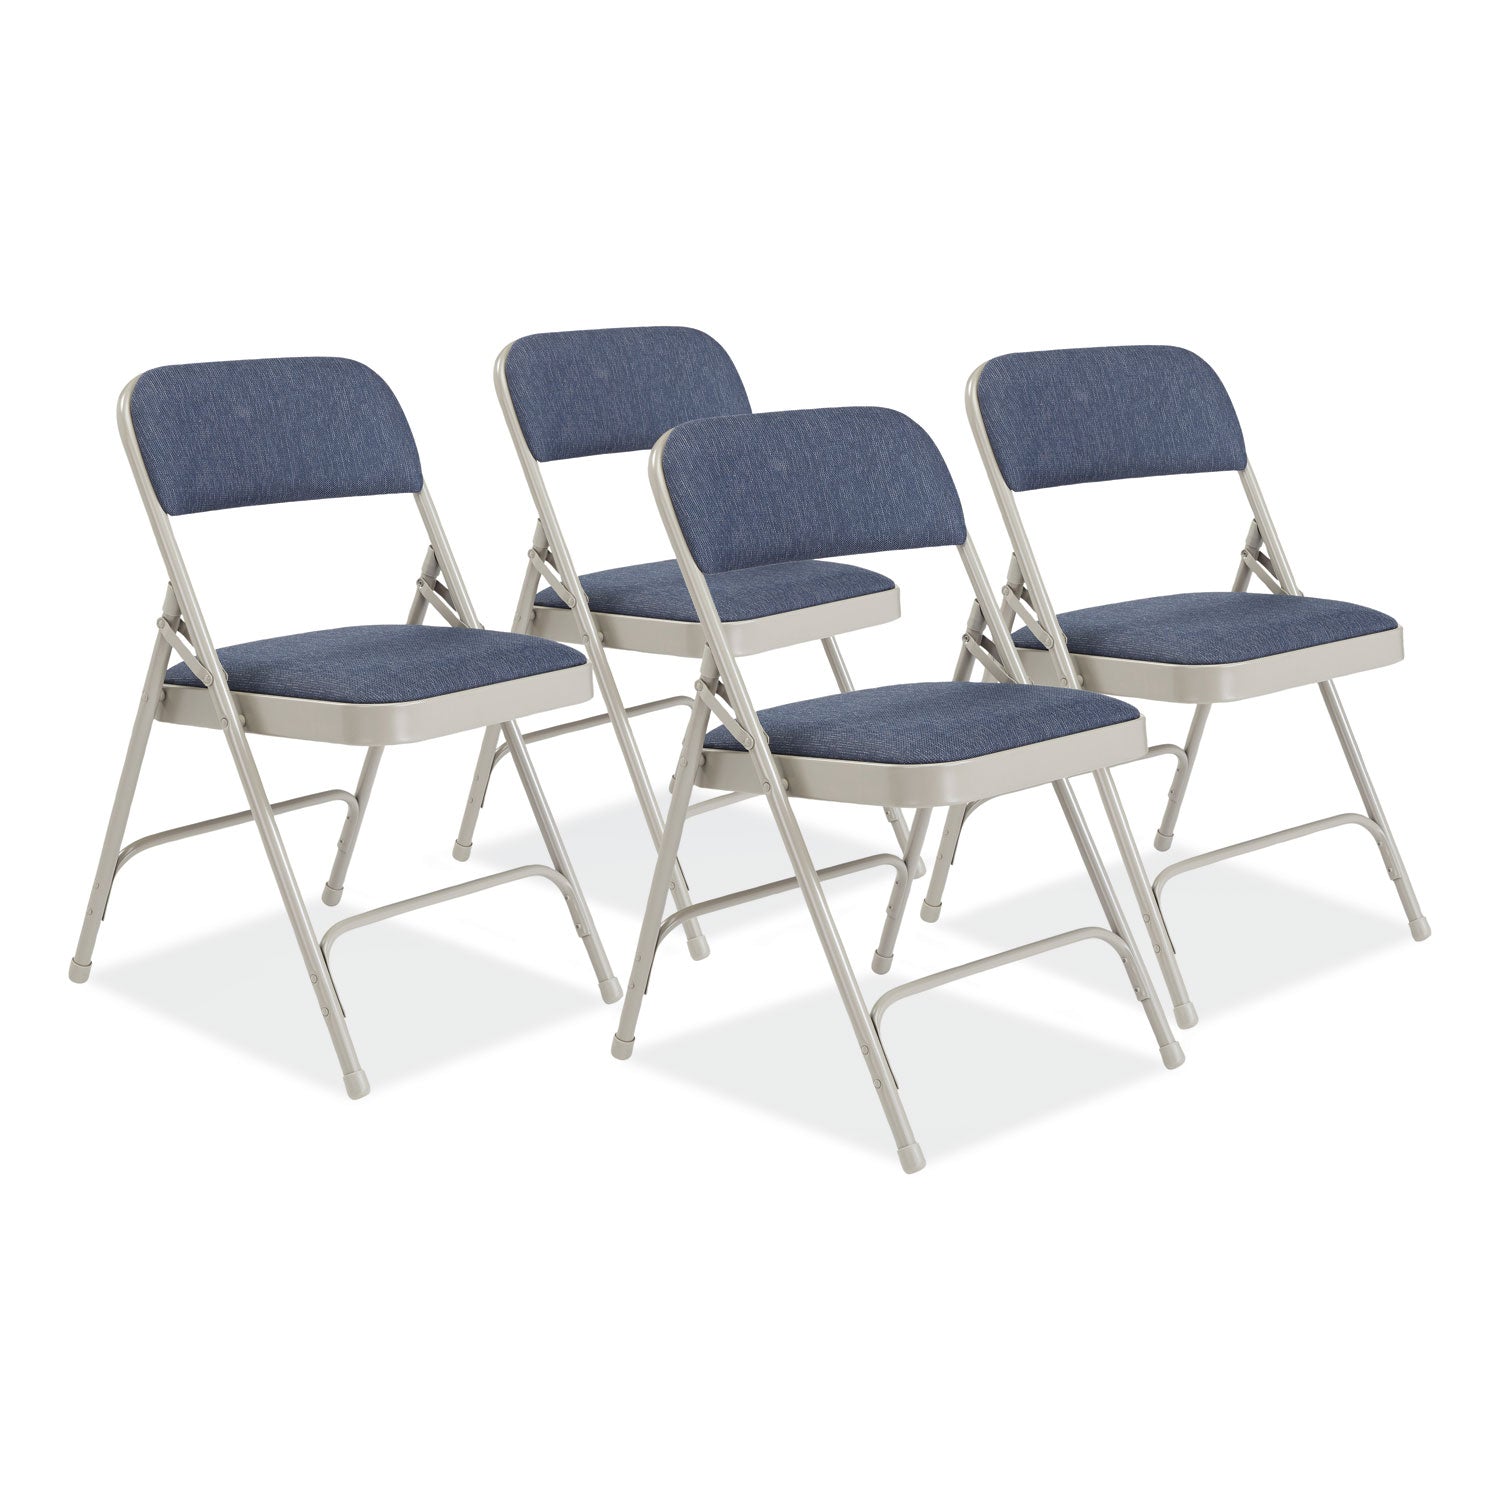 2200-series-fabric-dual-hinge-premium-folding-chair-supports-500-lb-blue-seat-back-gray-base-4-ct-ships-in-1-3-bus-days_nps2205 - 1